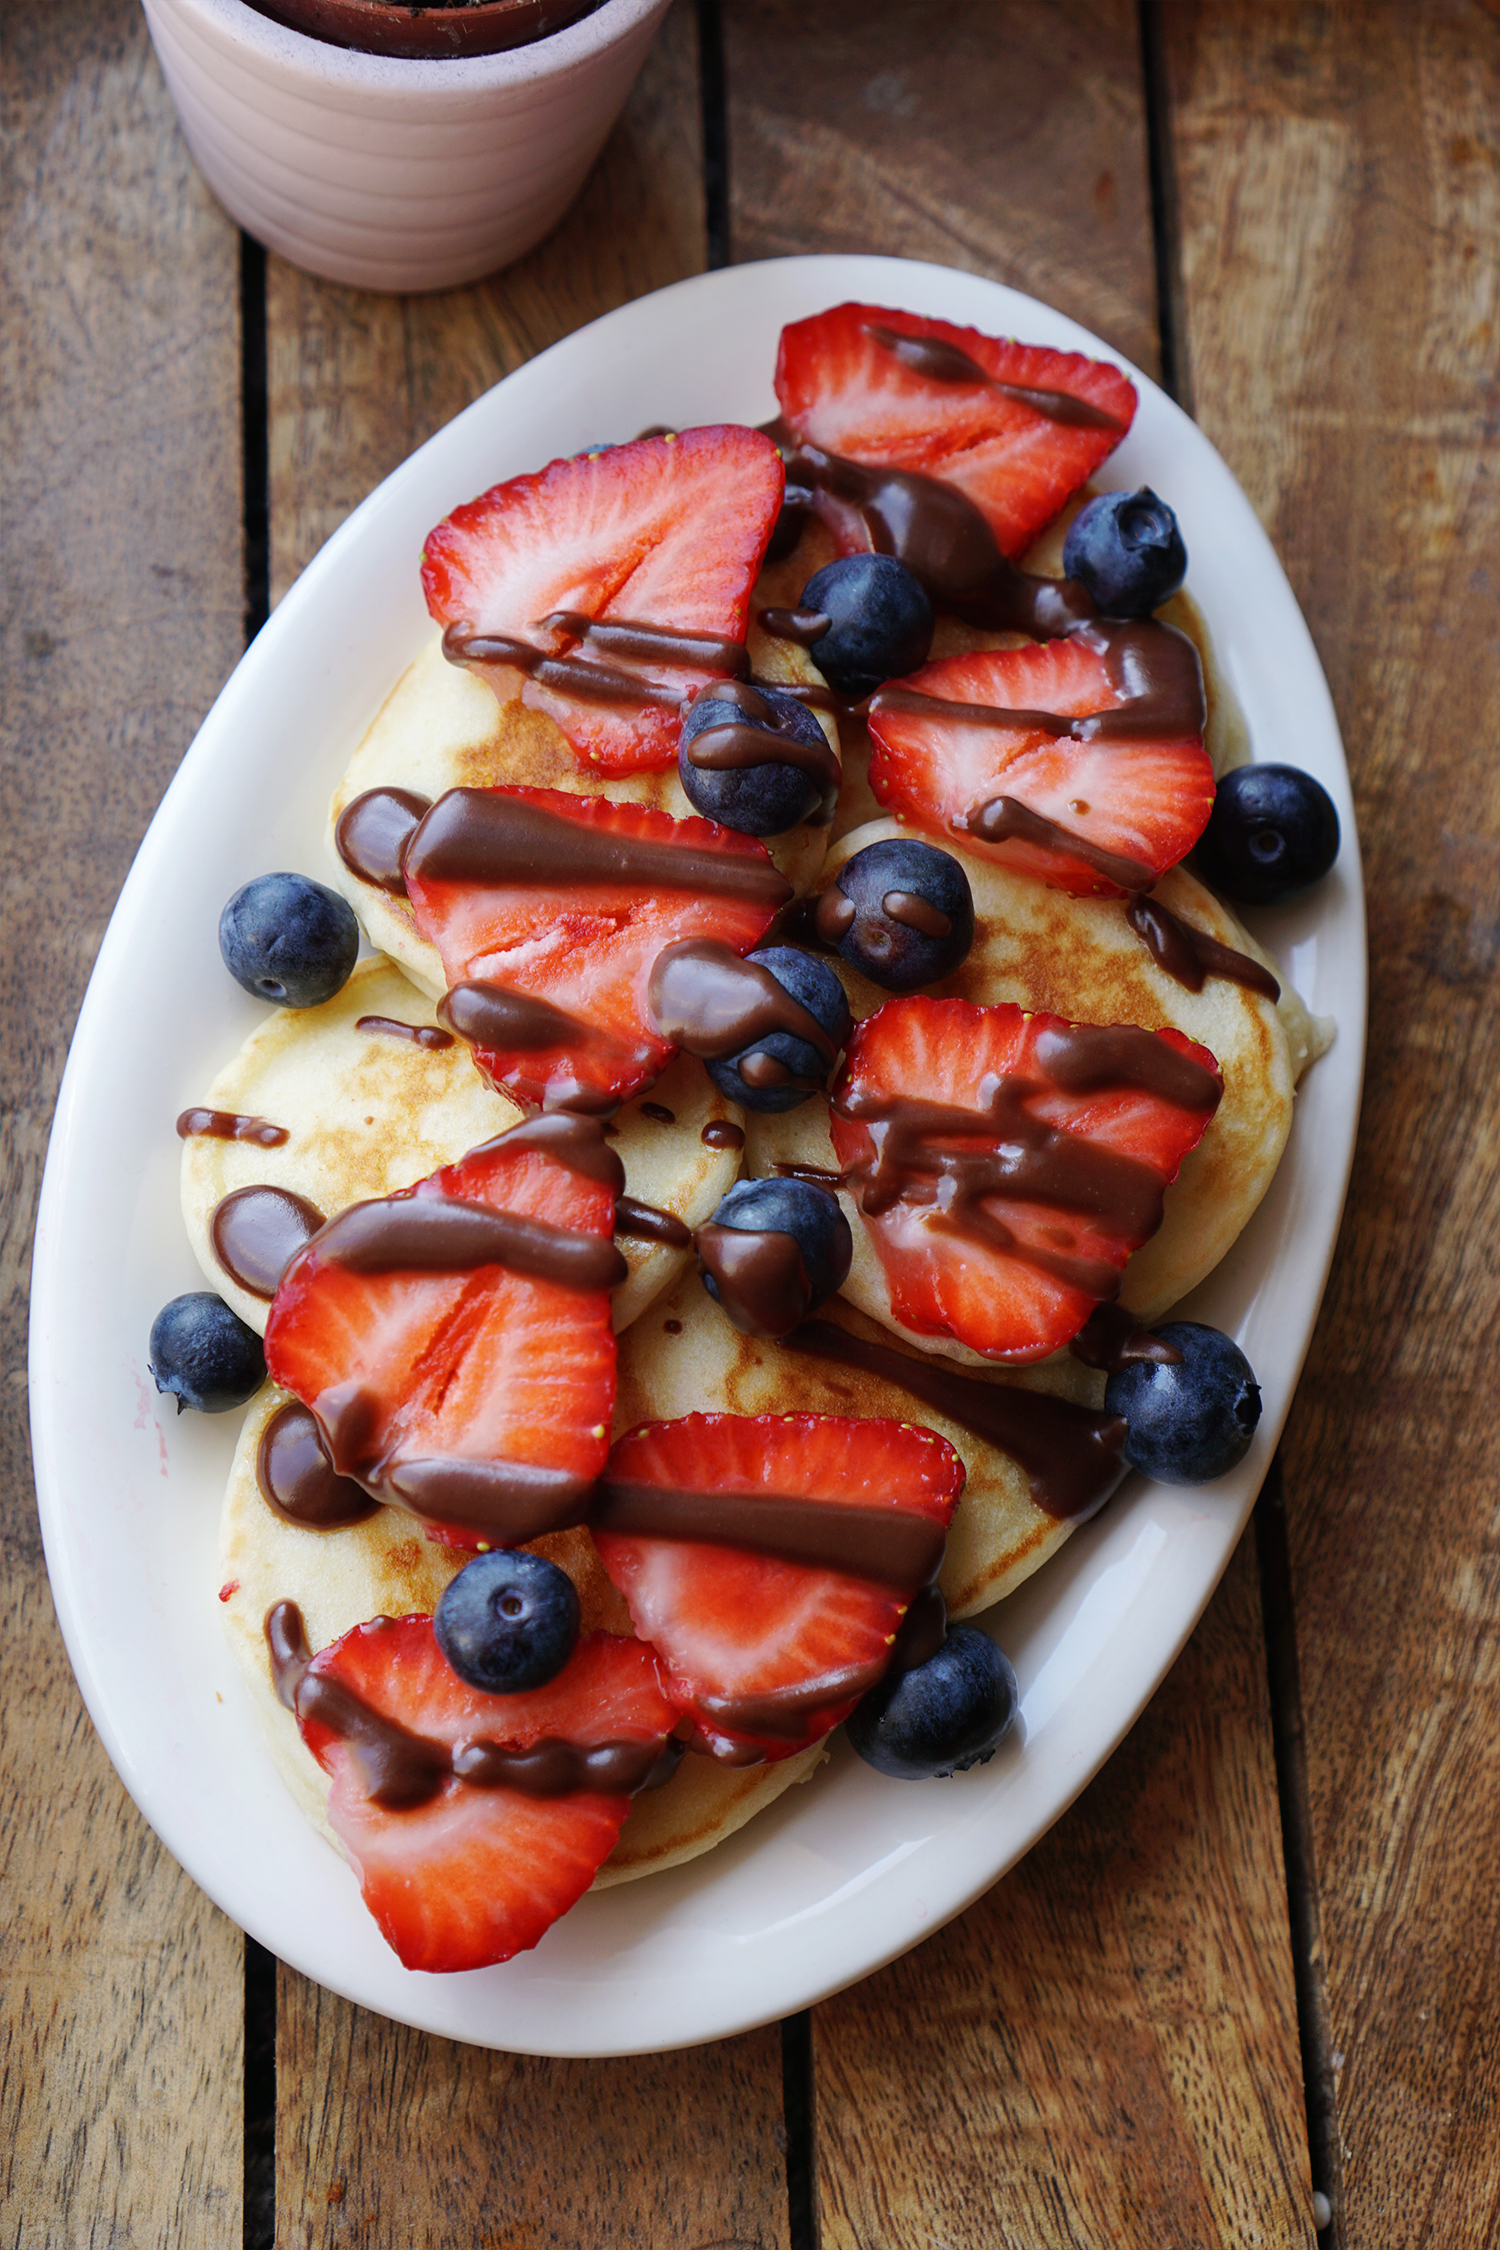 American style gluten free pancakes with strawberries, blueberries and a Nutella chocolate sauce | gluten free basics | gluten free breakfasts basics | gluten free brunch | gluten free recipes